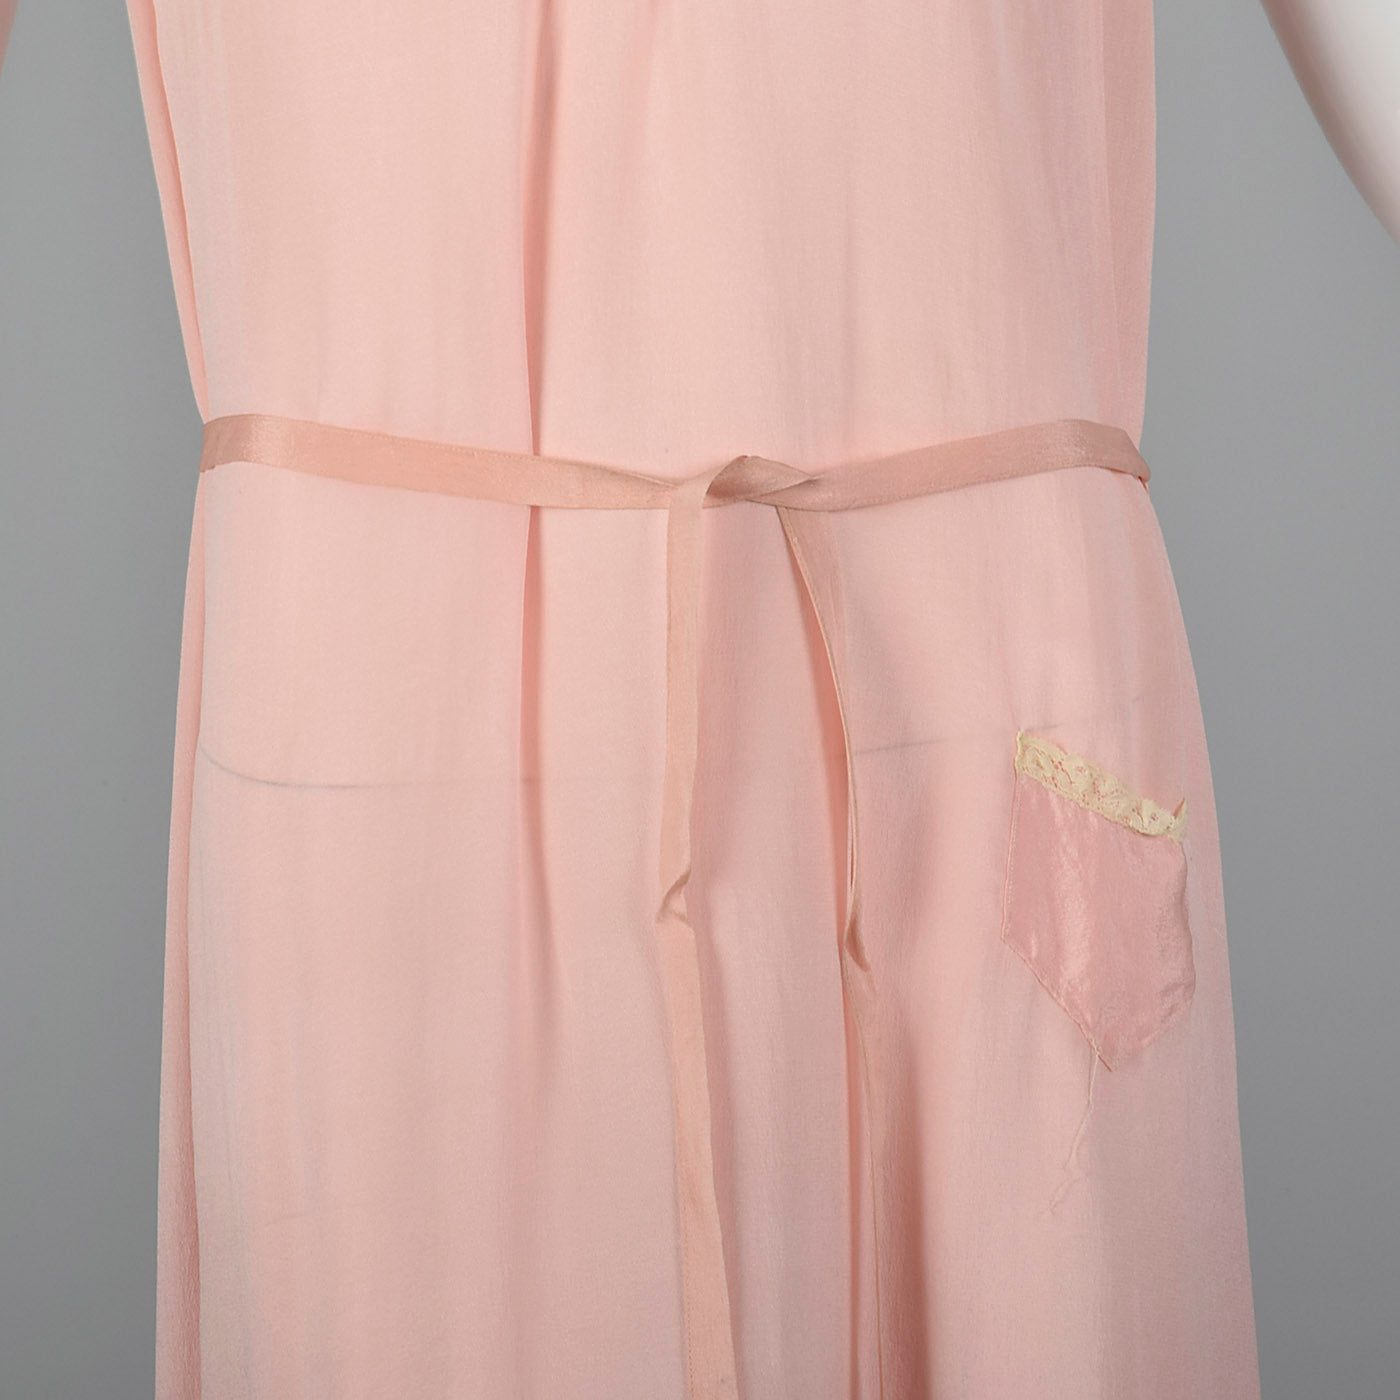 1920s Pink Silk Nightgown with Belt